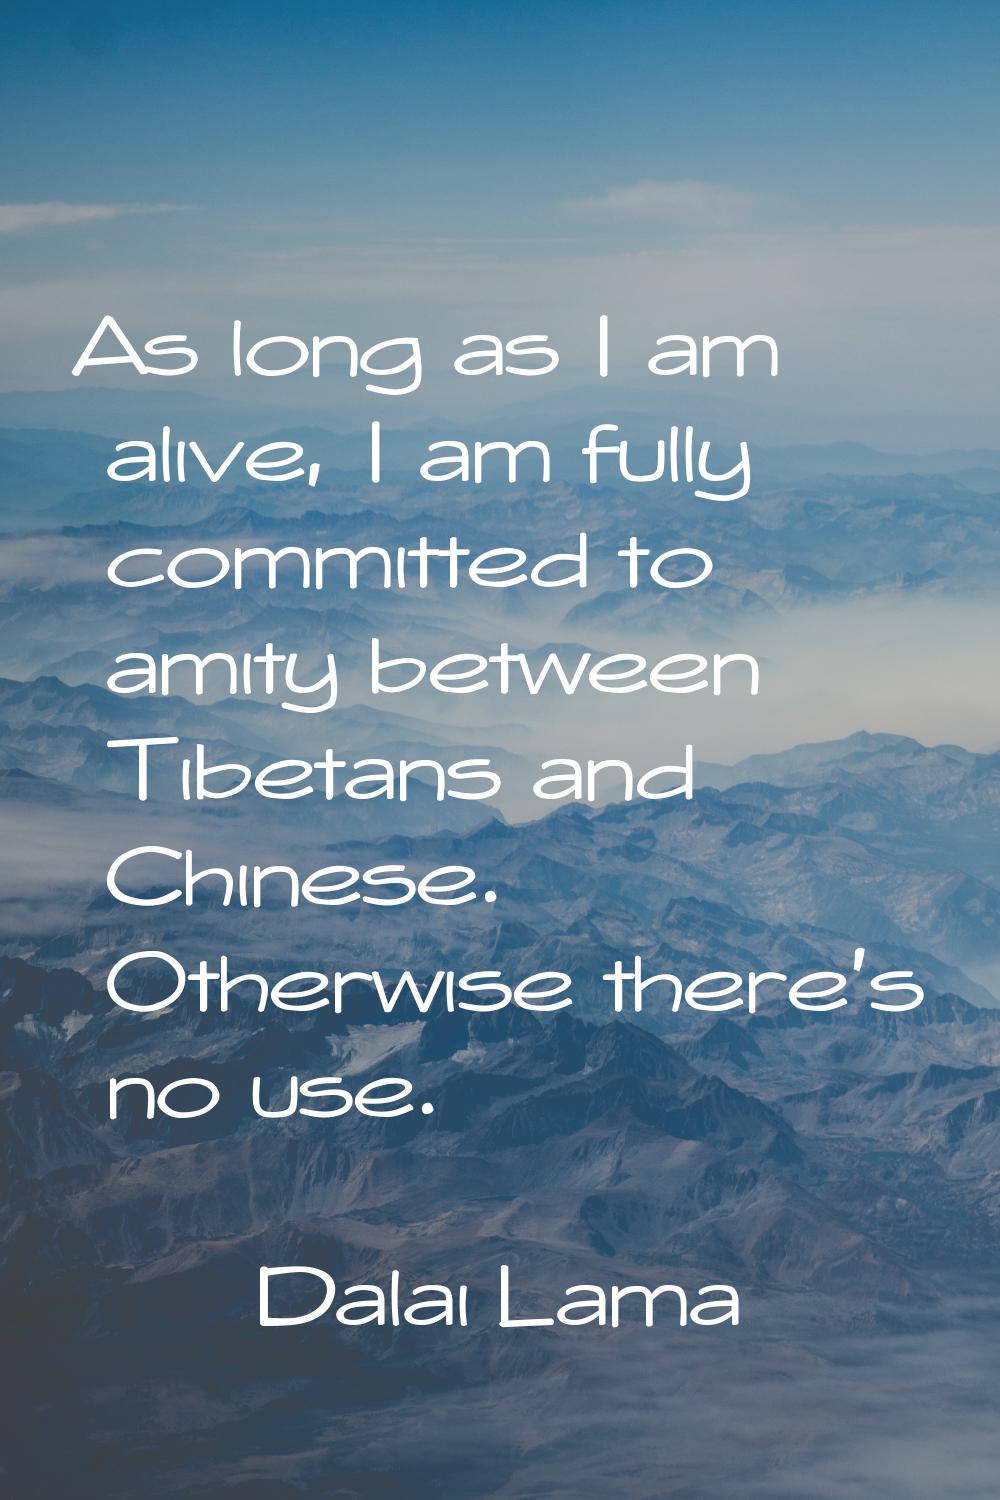 As long as I am alive, I am fully committed to amity between Tibetans and Chinese. Otherwise there'